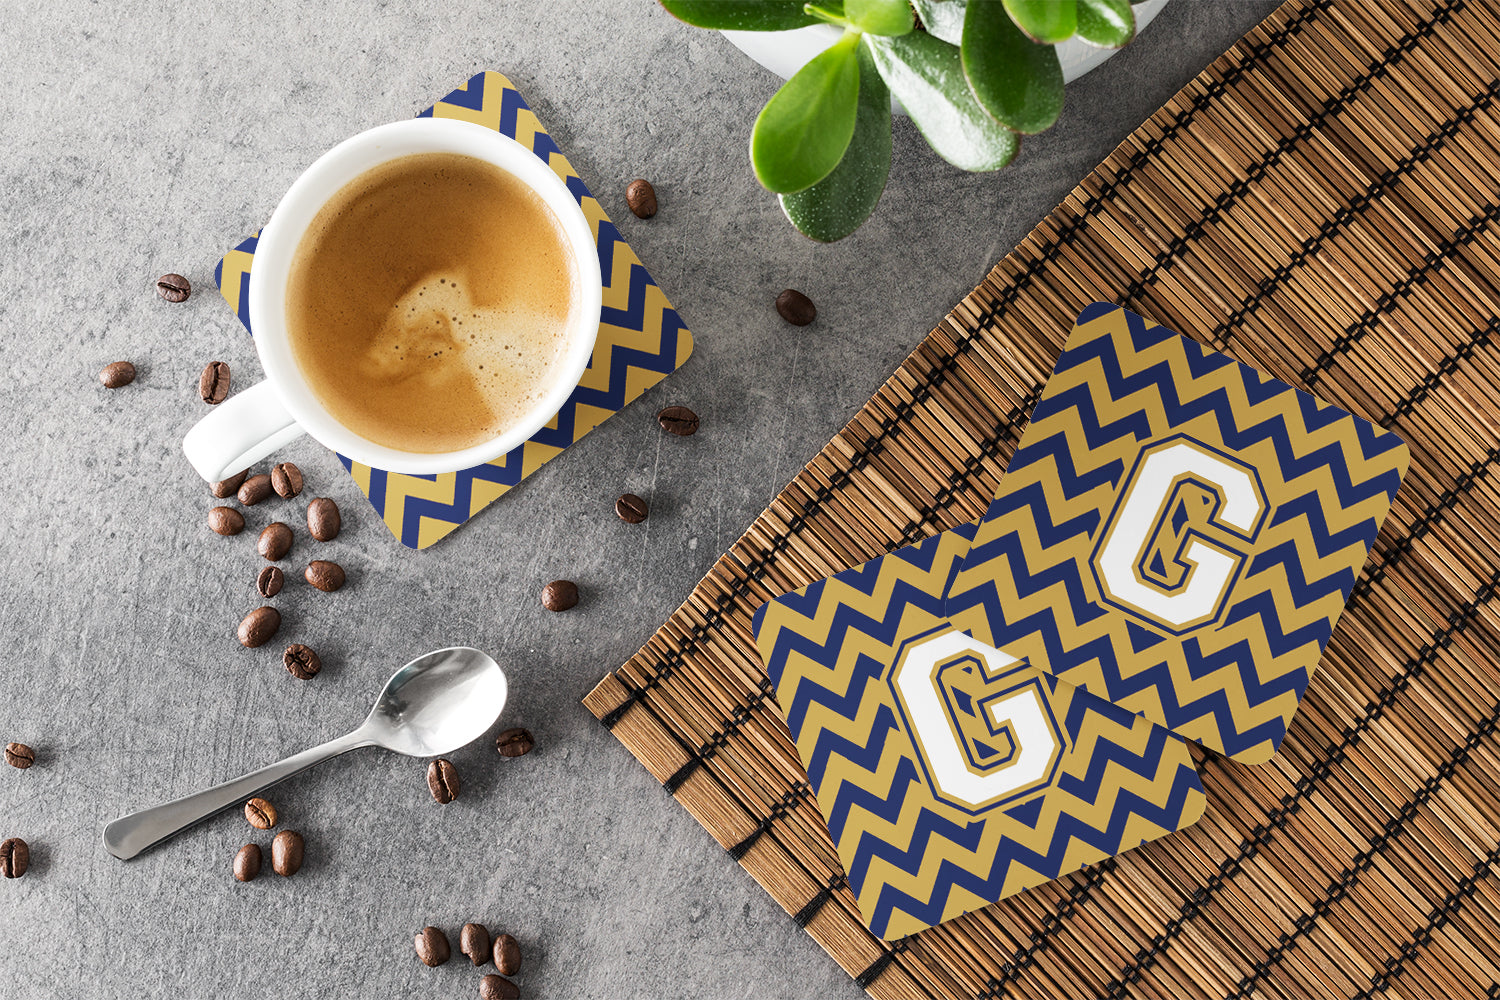 Letter G Chevron Navy Blue and Gold Foam Coaster Set of 4 CJ1057-GFC - the-store.com